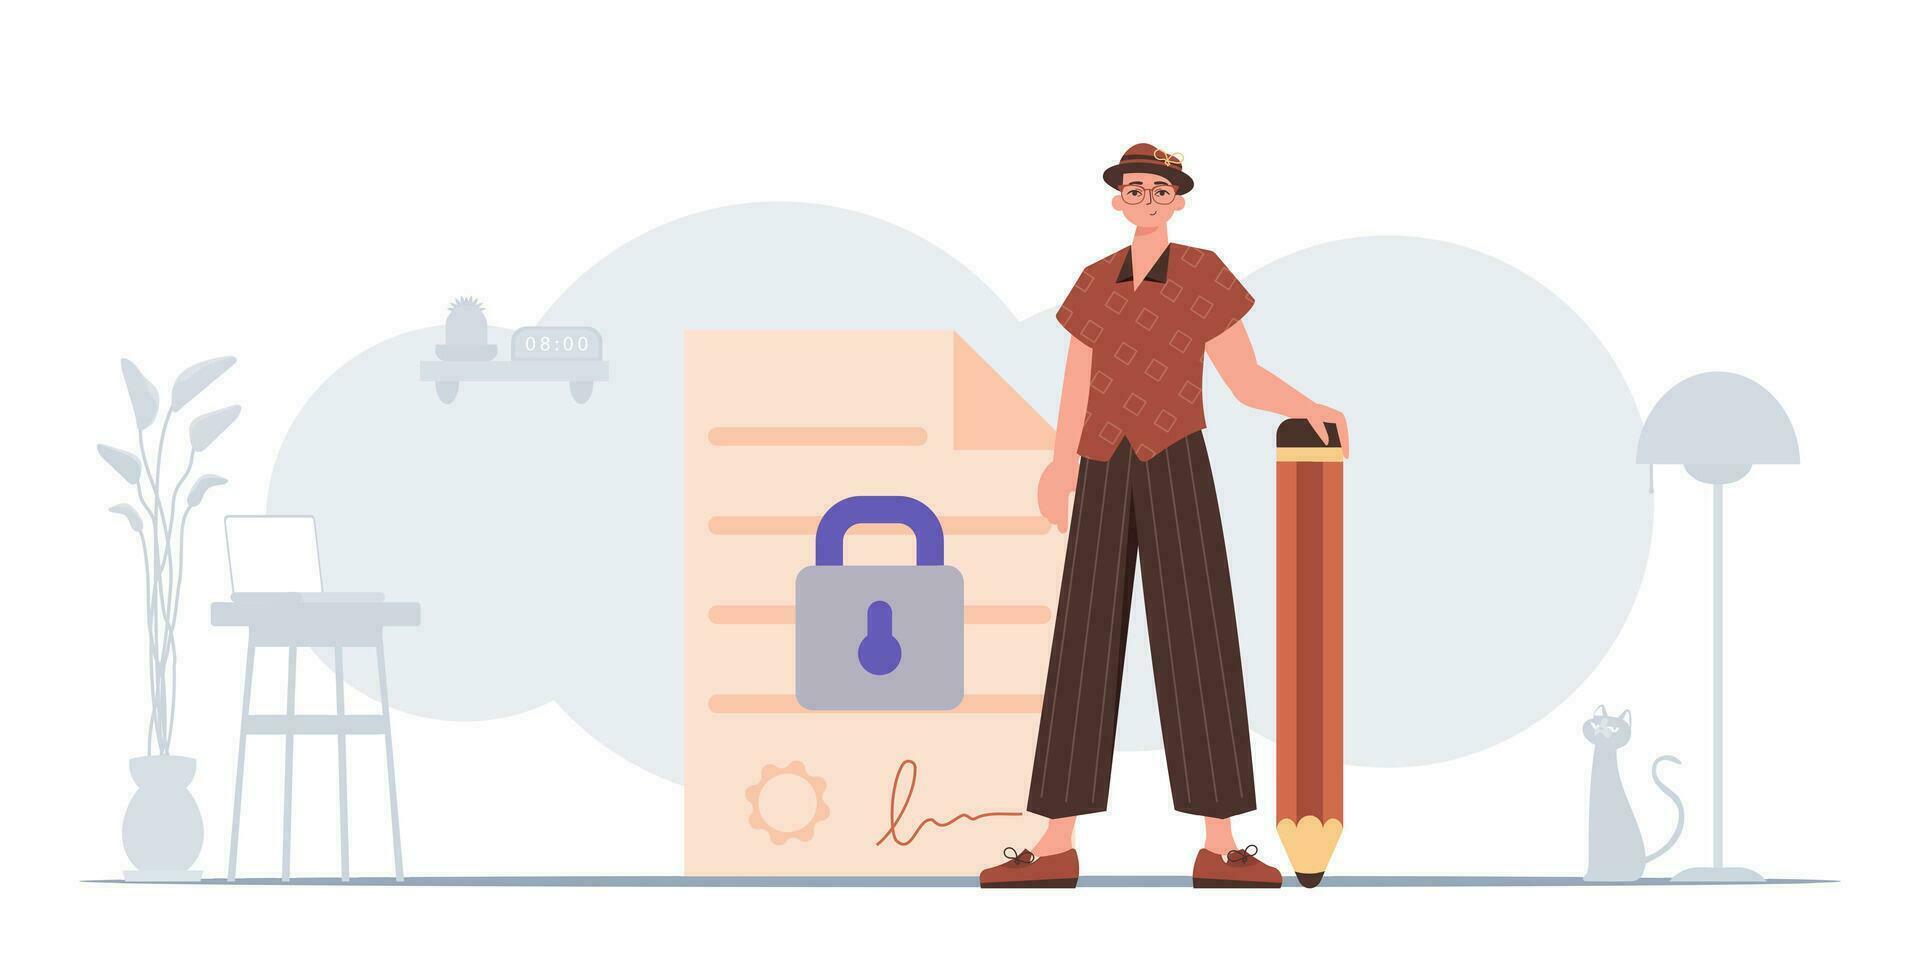 The concept of signing and protecting data. Smart contract. The guy is standing near a large document and holding a pencil. vector